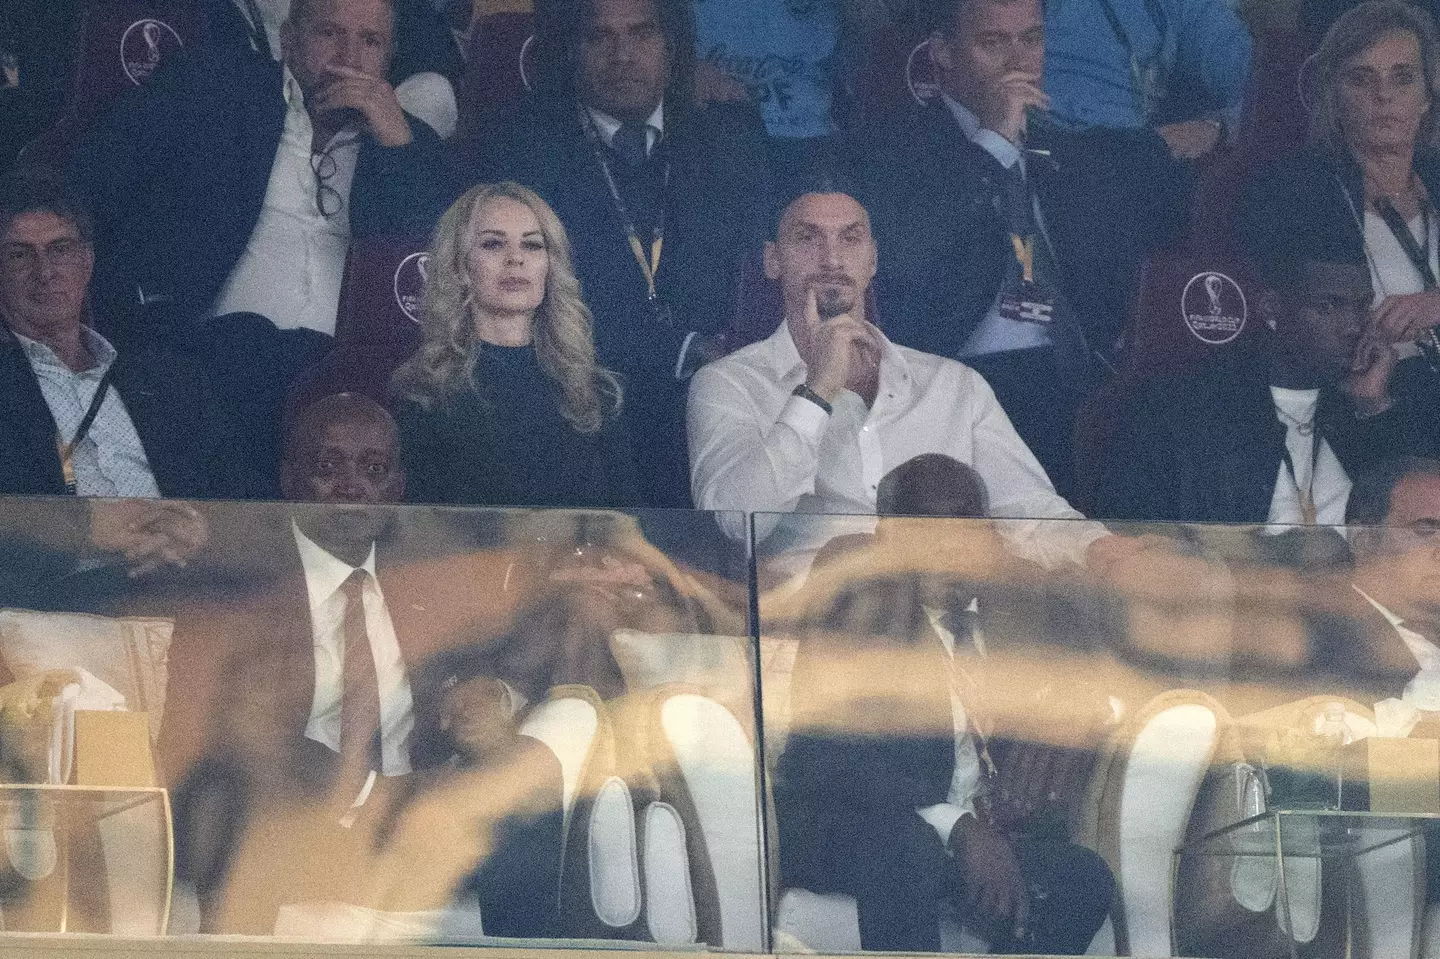 Zlatan Ibrahimovic watched on in the stands.